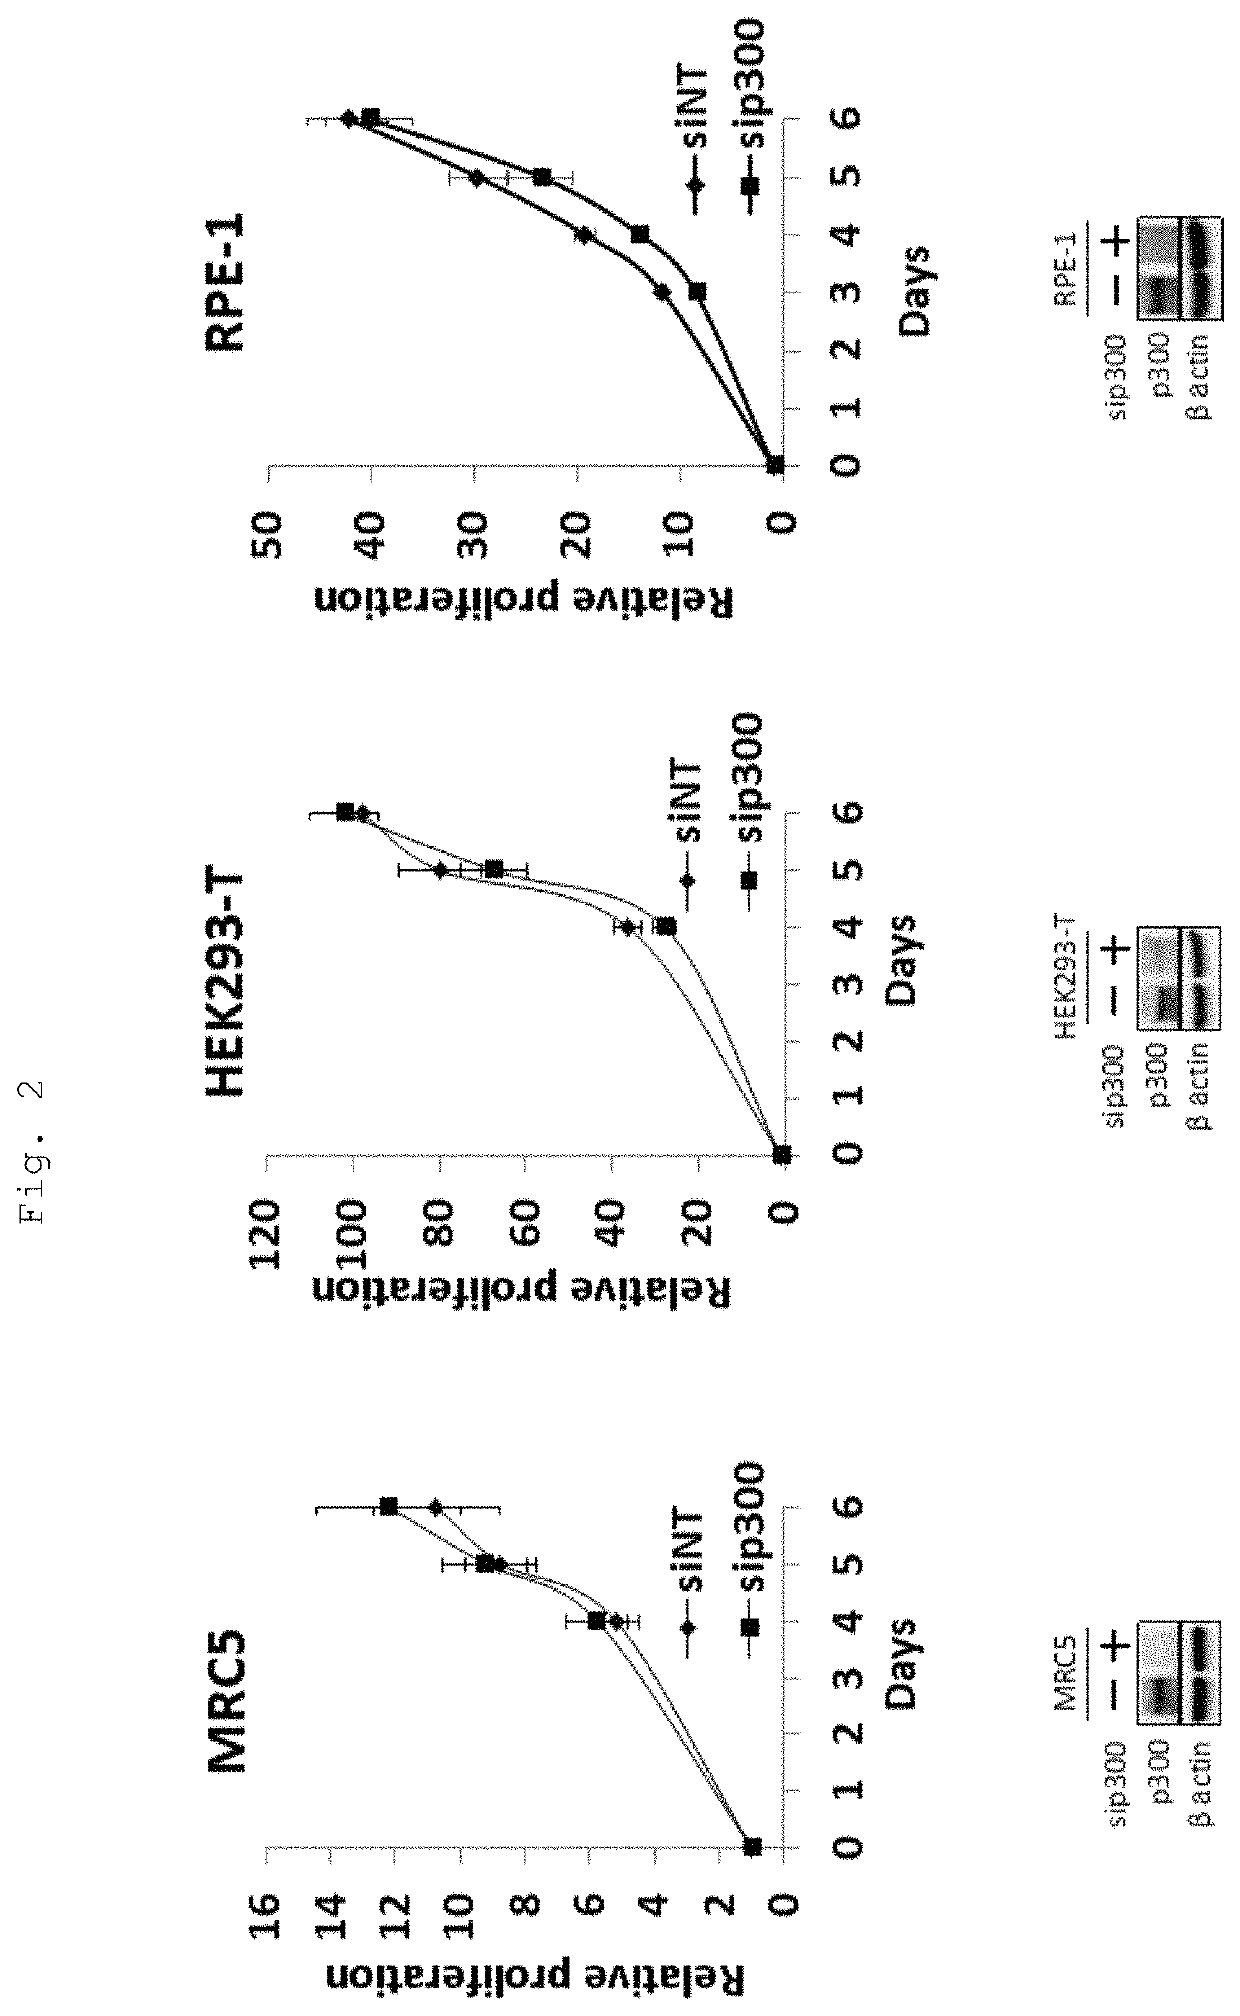 Method for predicting responsiveness to cancer treatment using p300-inhibiting compound